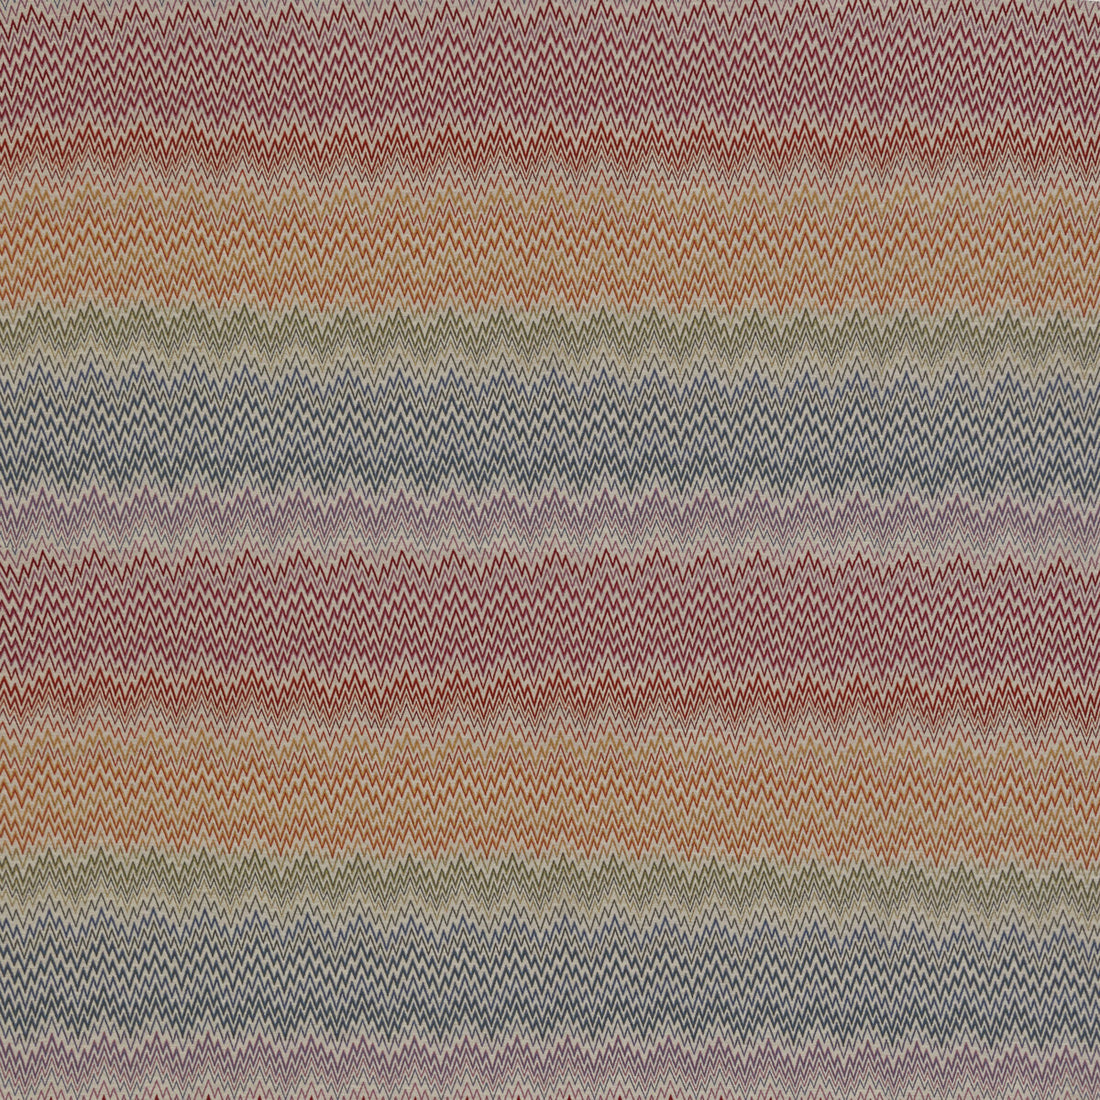 Arras fabric in 100 color - pattern 36155.524.0 - by Kravet Couture in the Missoni Home 2021 collection